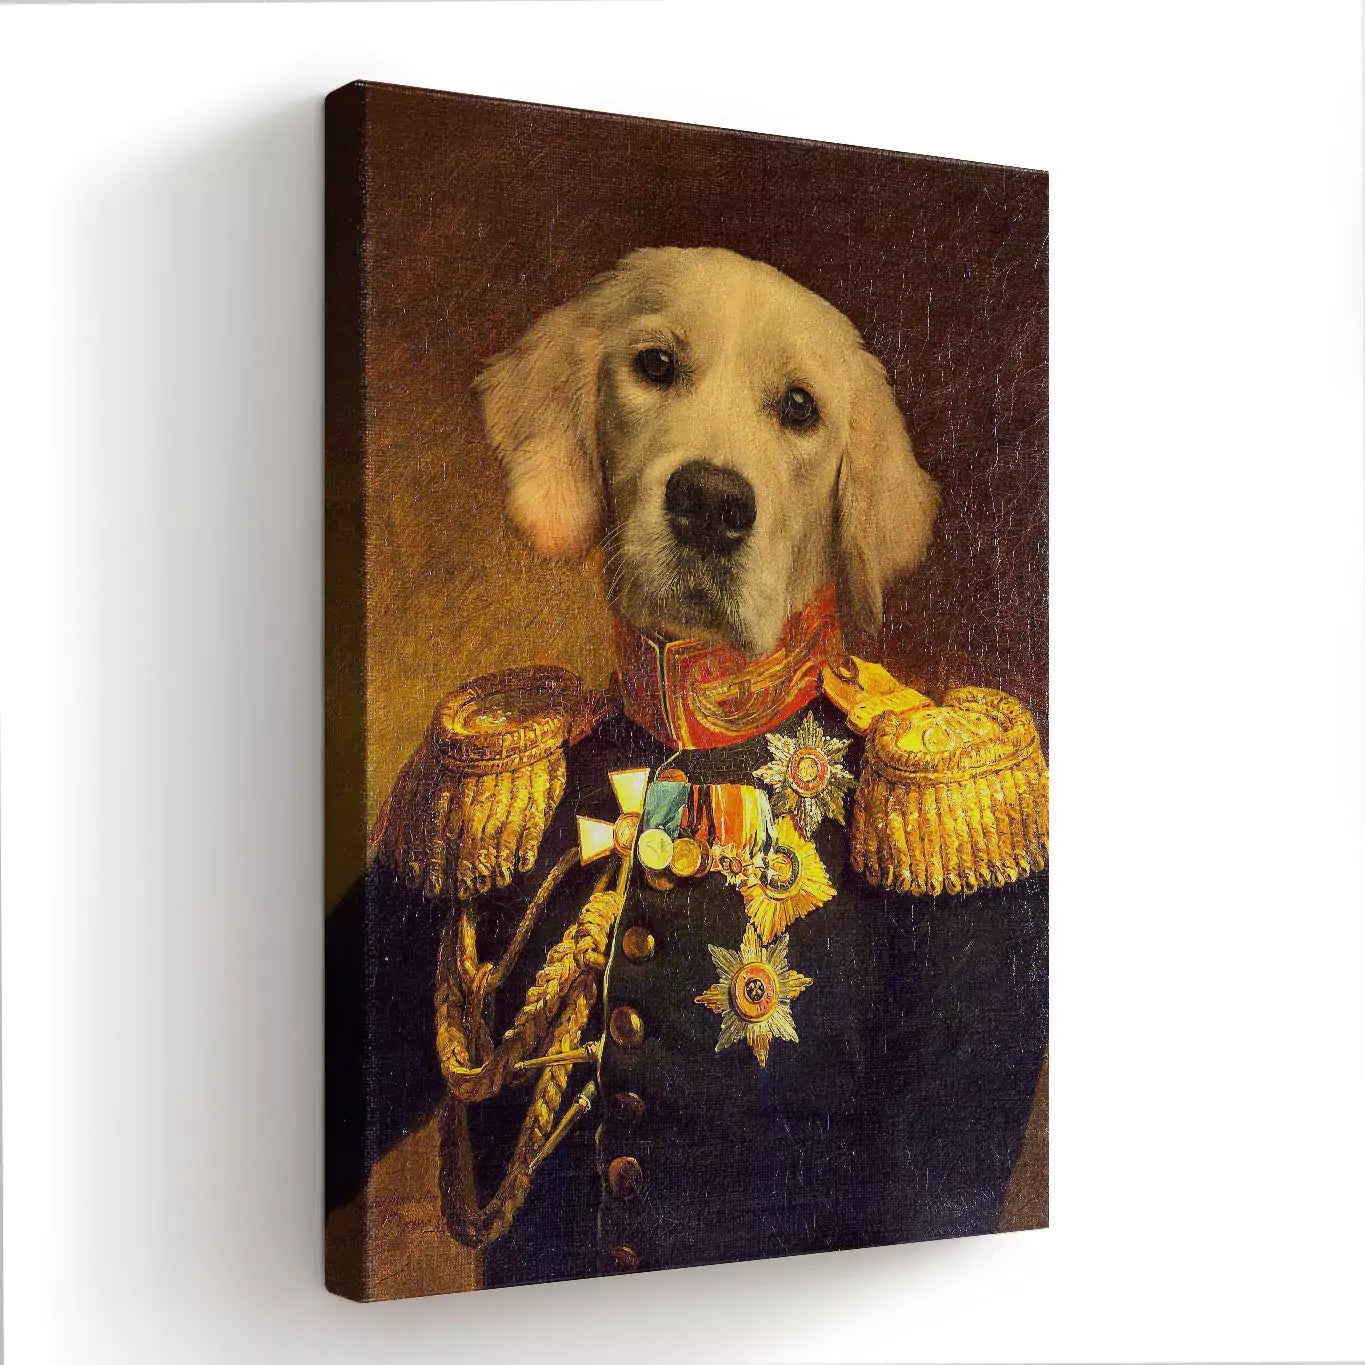 royal dog painting, renaissance dog painting, admiral dog print, admiral pet print, admiral dog canvas, vintage dog art, dog wearing vintage clothes, dog in admiral outfit with epaulettes, personalised dog canvas